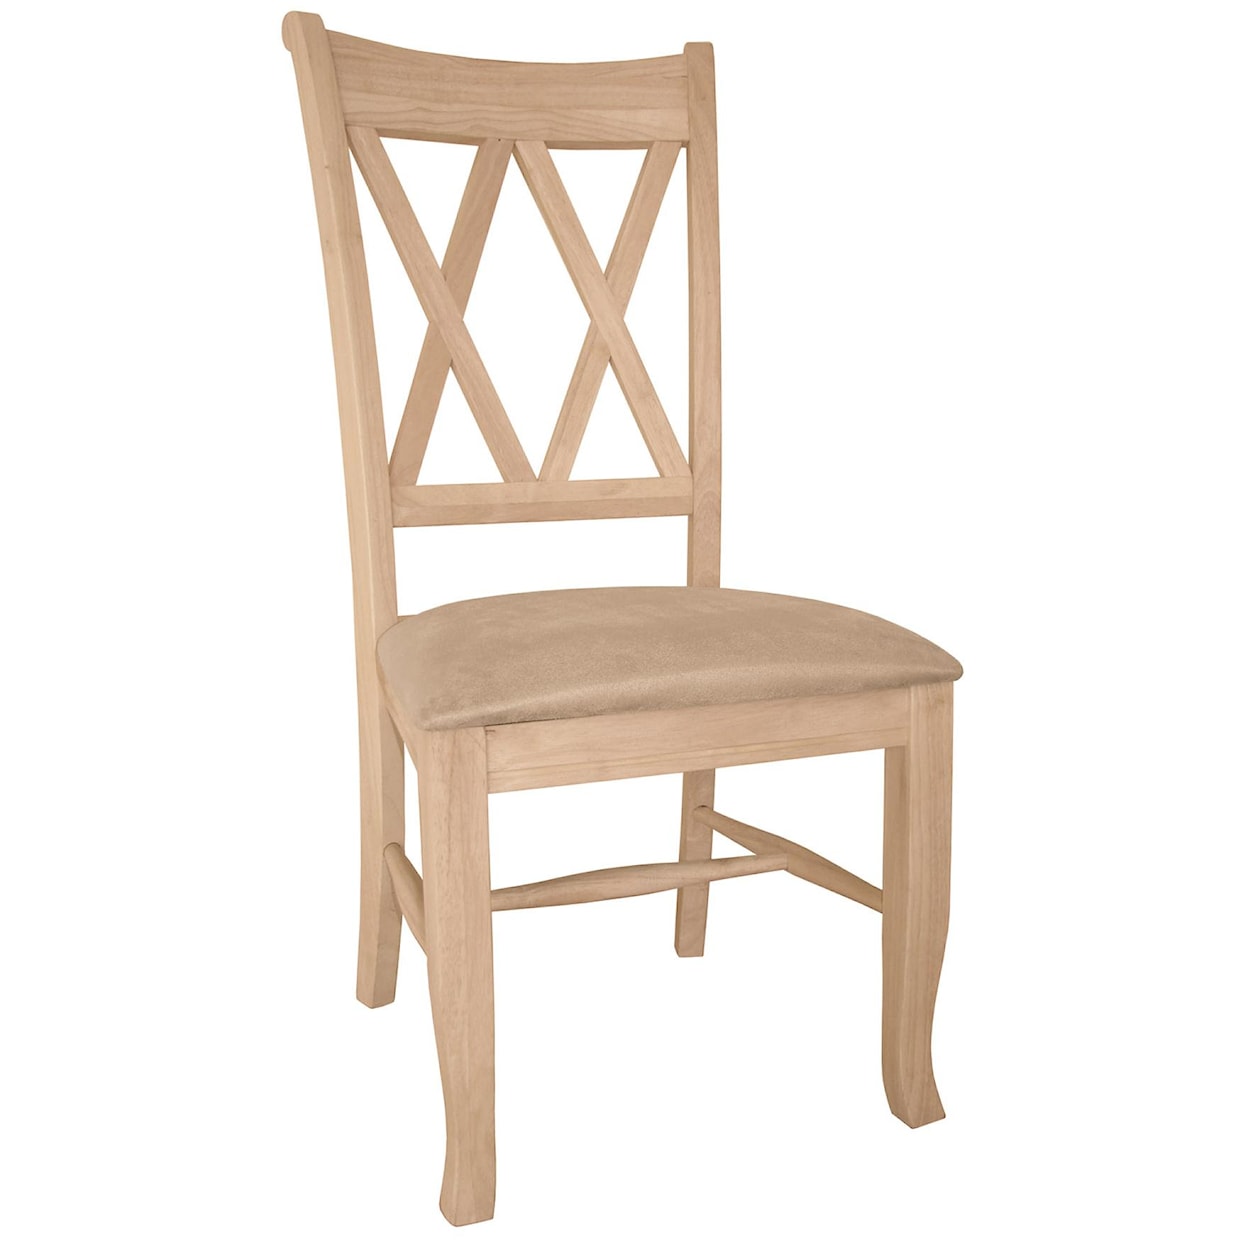 John Thomas SELECT Dining Room Double X-Back Chair with Seat Cushion